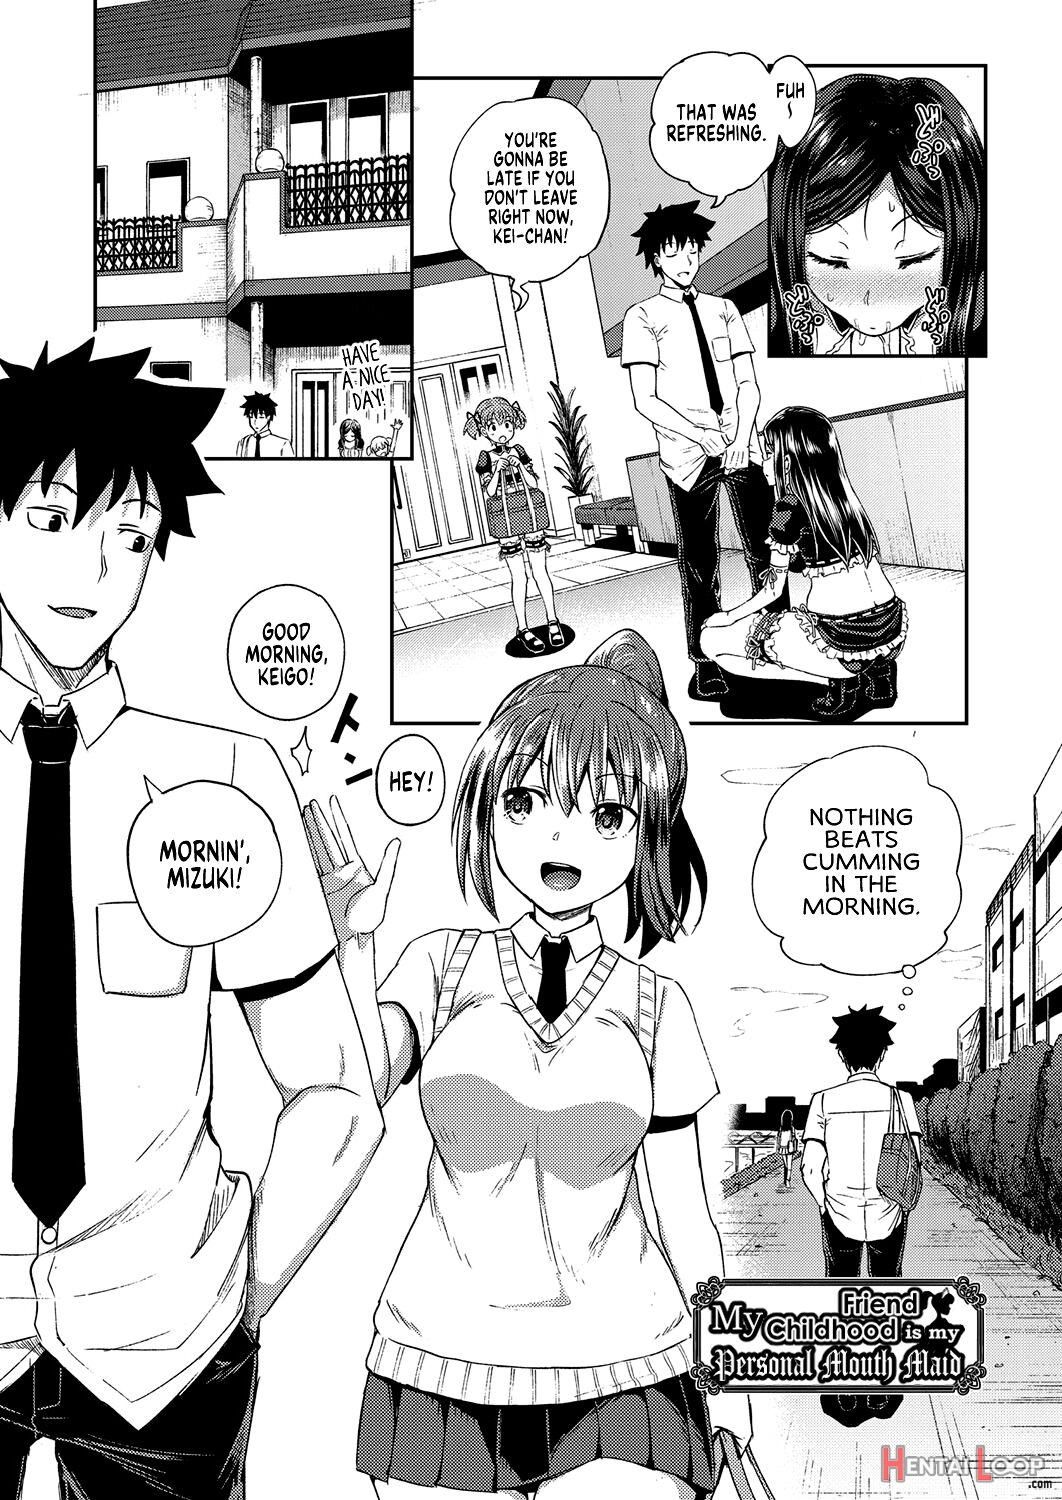 My Childhood Friend Is My Personal Mouth Maid page 2